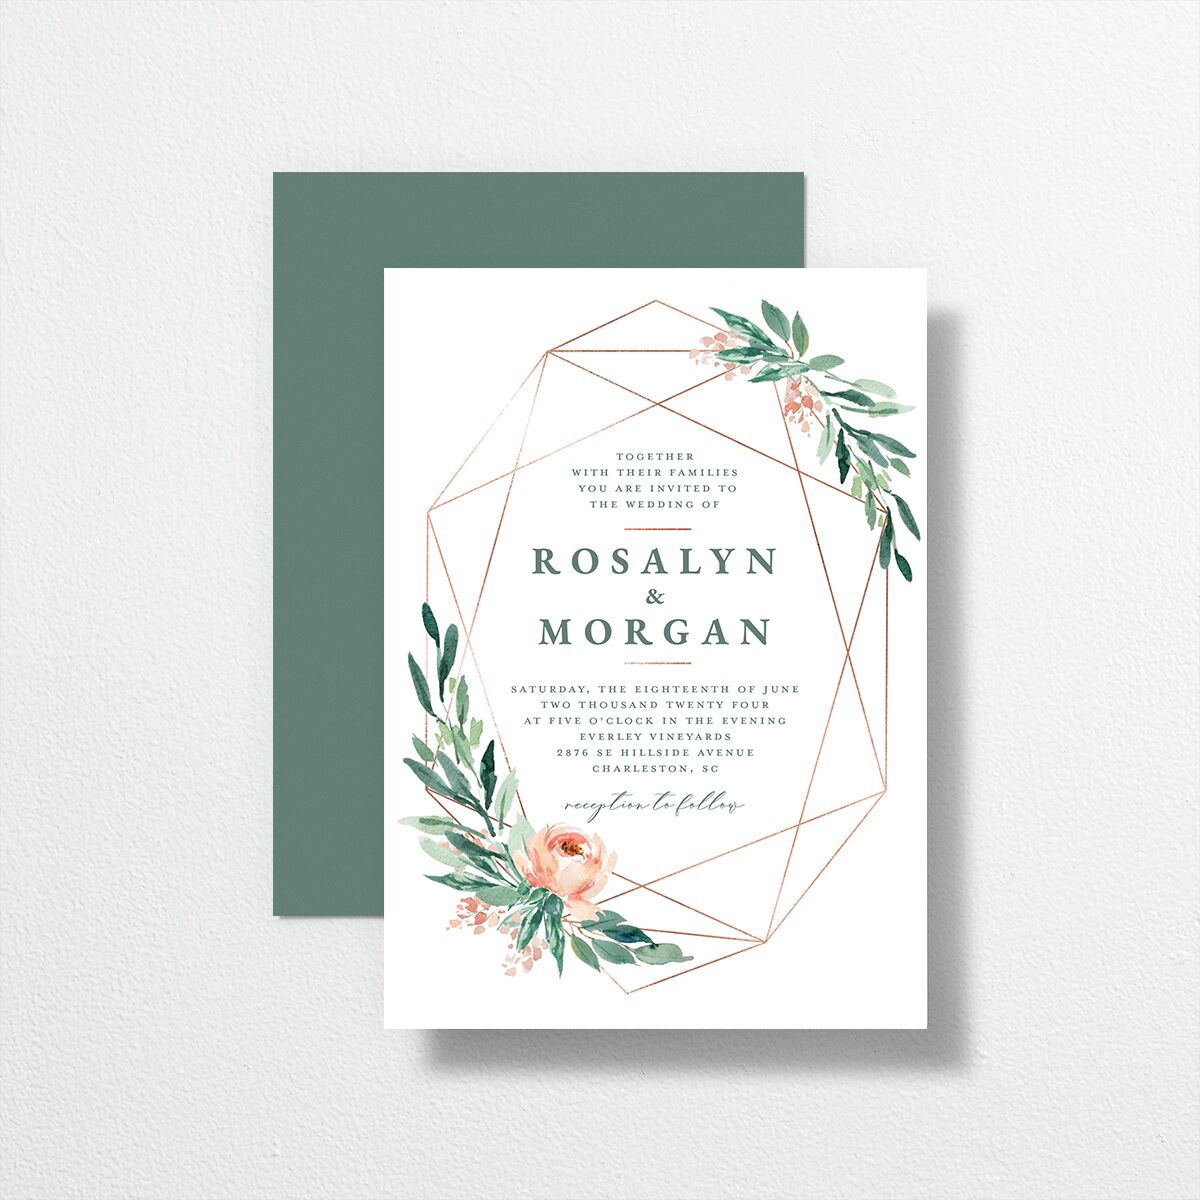 Gilded Botanical Wedding Invitations front-and-back in green